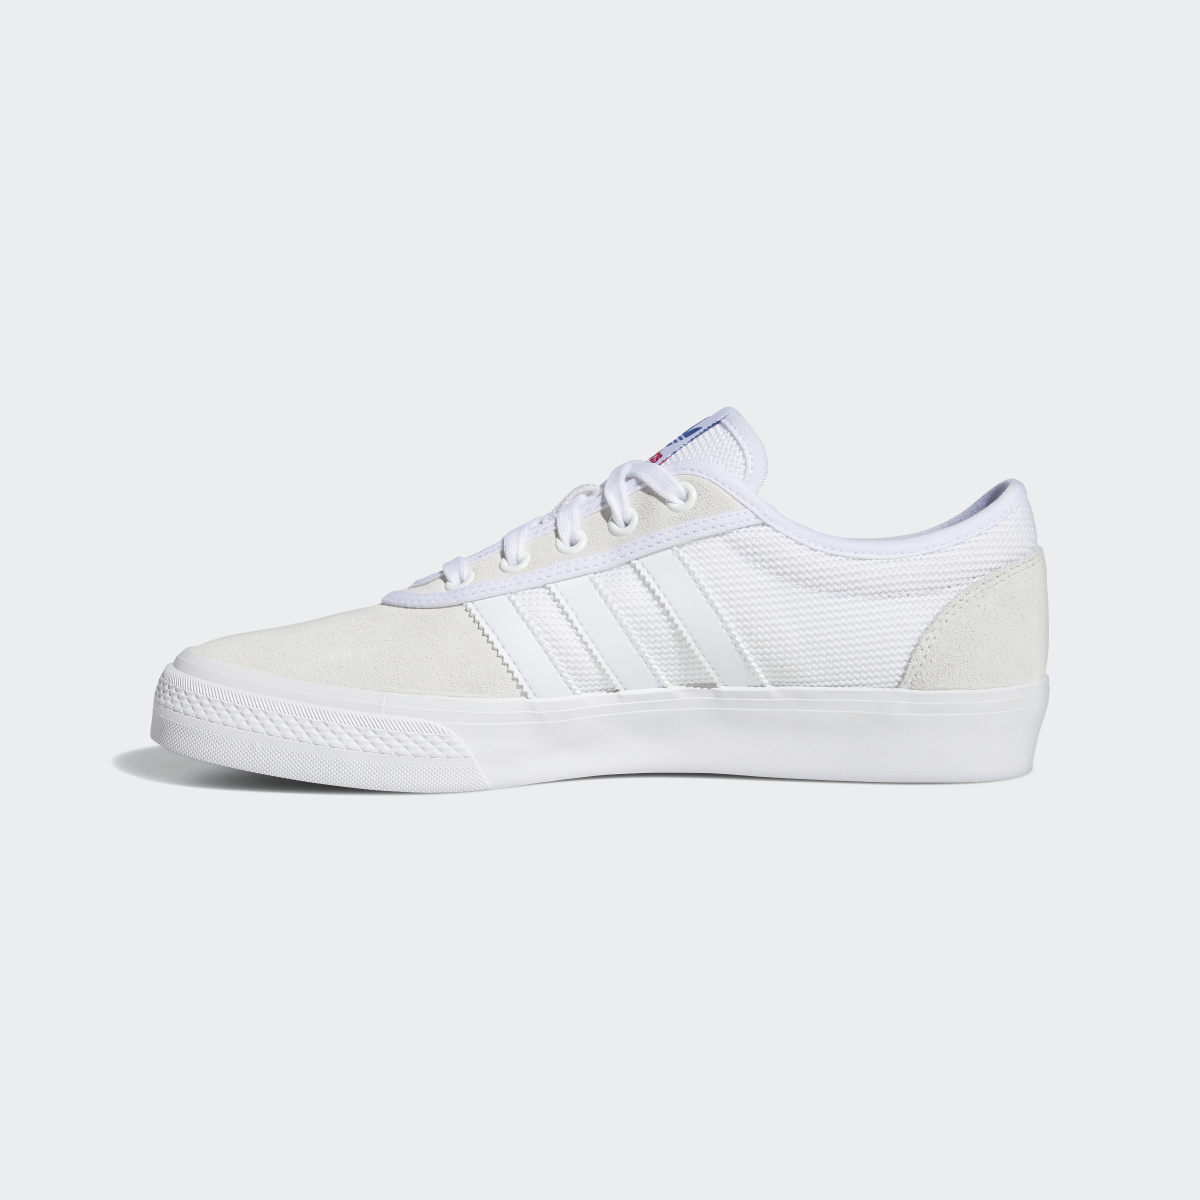 Adidas Adiease Shoes. 7